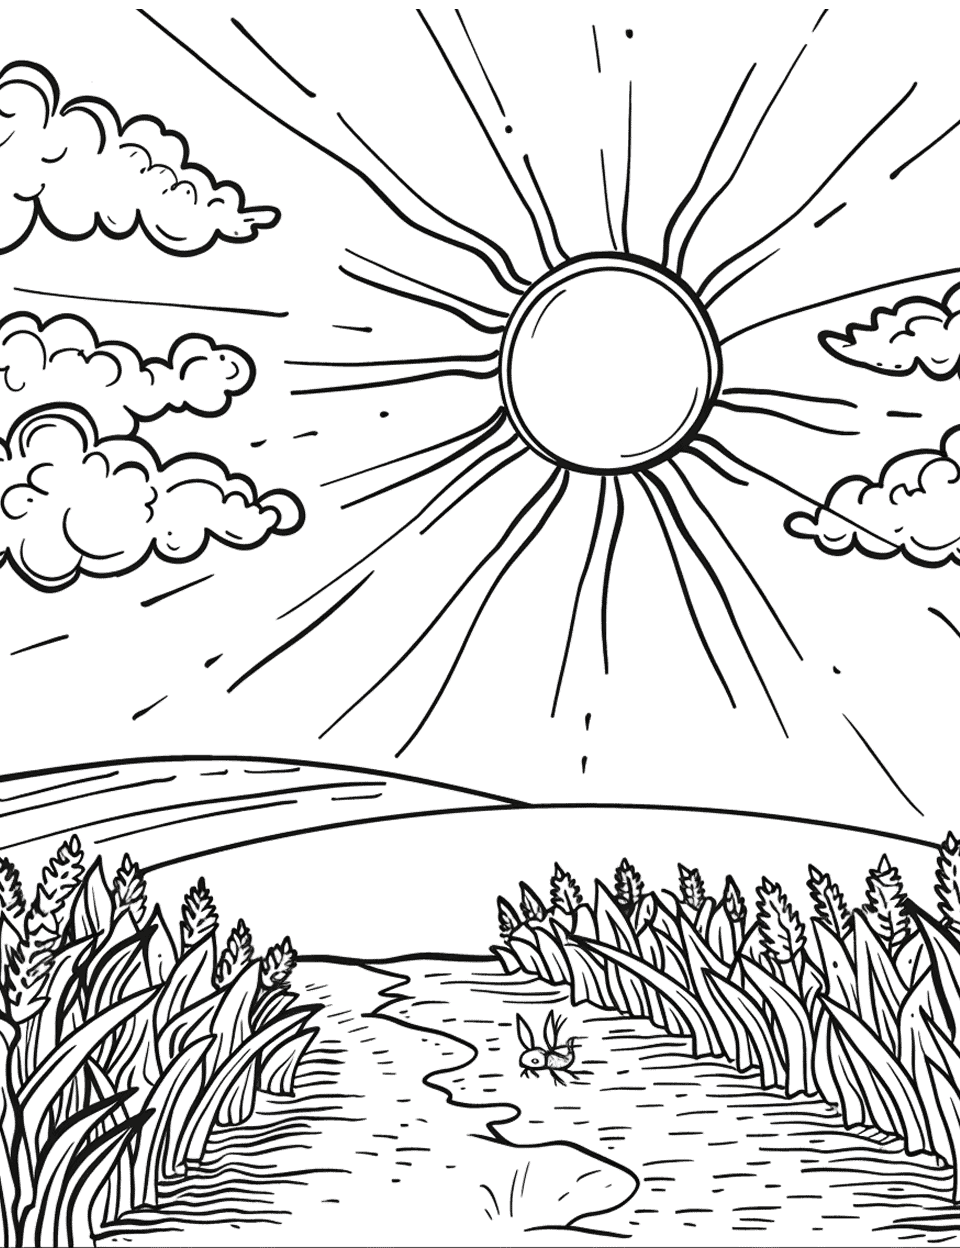 Summer Sun over a Cornfield Coloring Page - The blazing summer sun shining down on a vast cornfield.